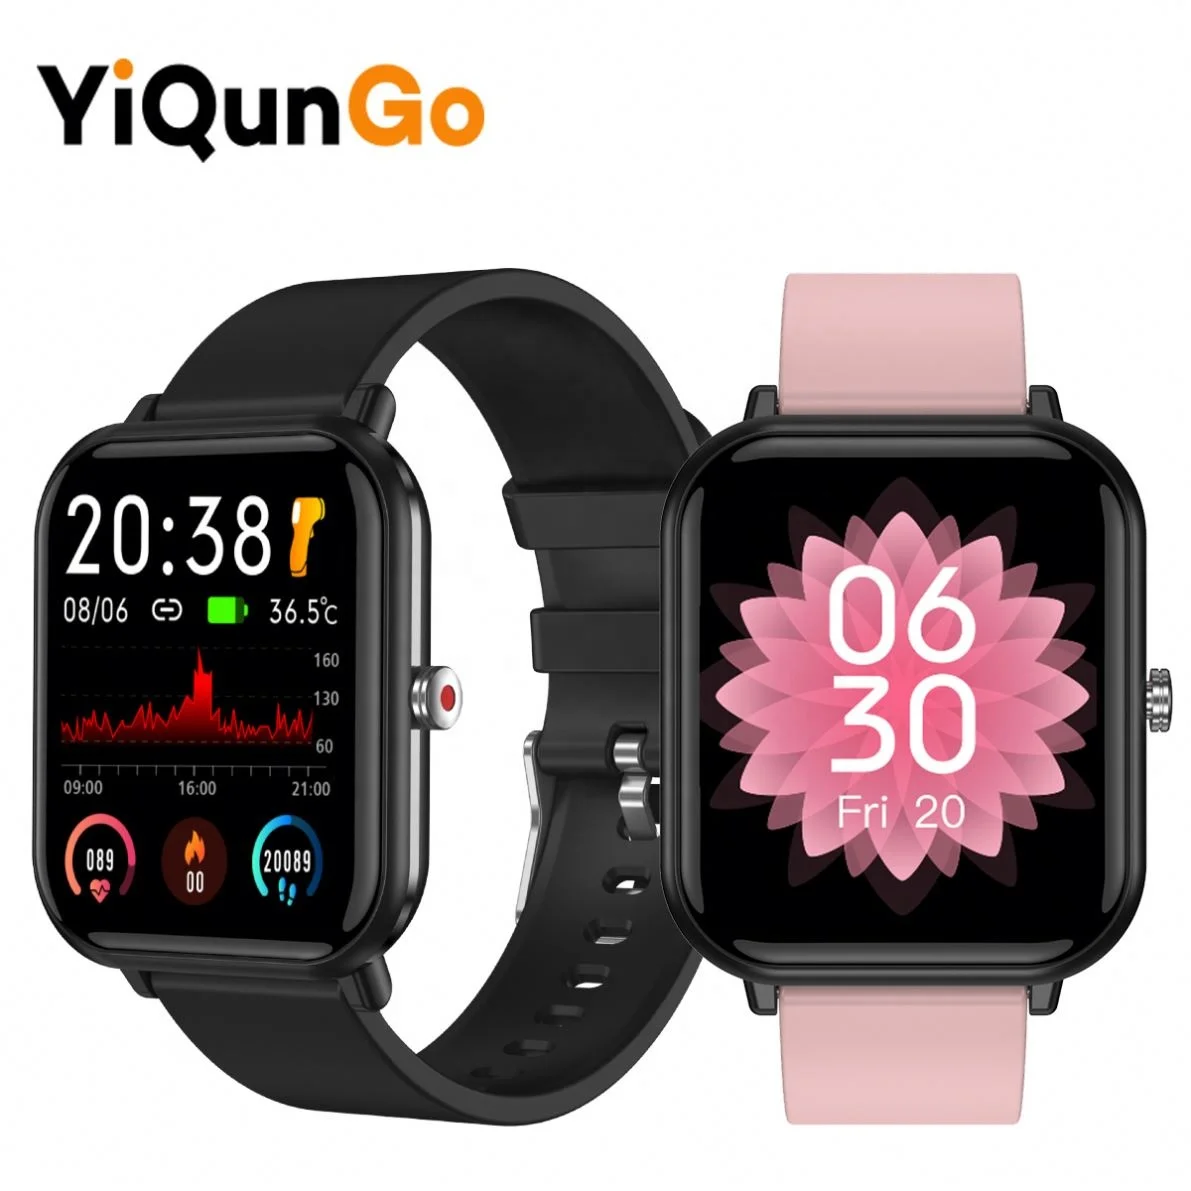 Smart Watch for IP68 Waterproof 5ATM, Fitness Tracker Heart Rate Monitor  Sports Digital Watch with 1.4 HD Square Shaped Screen and Silicone Strap